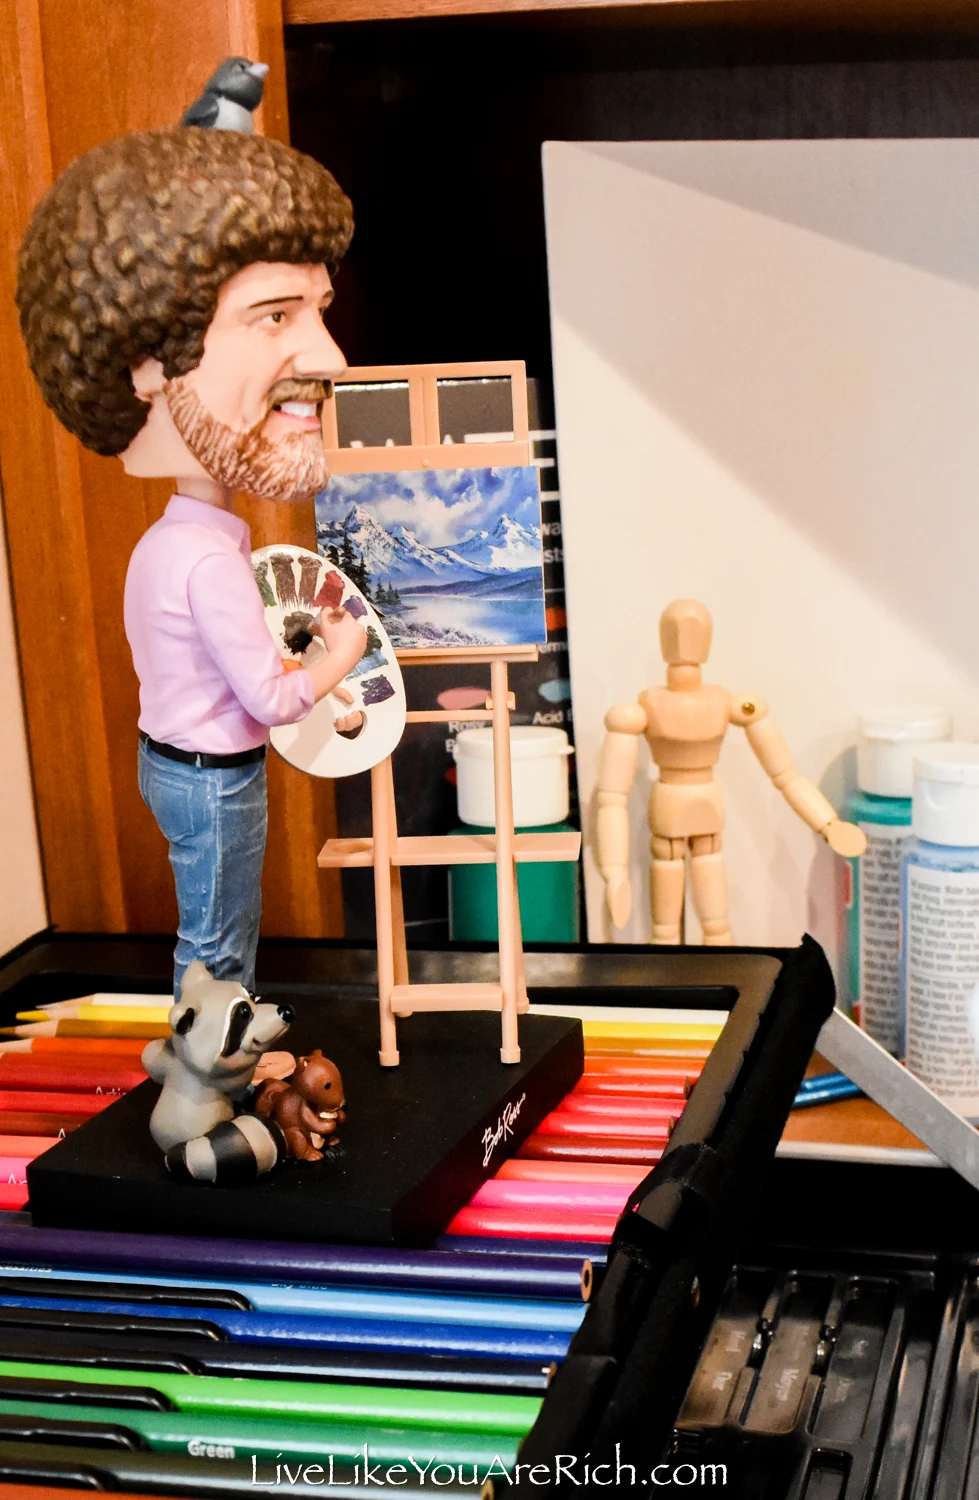 Elf on the Shelf: Bob Ross Painting Party